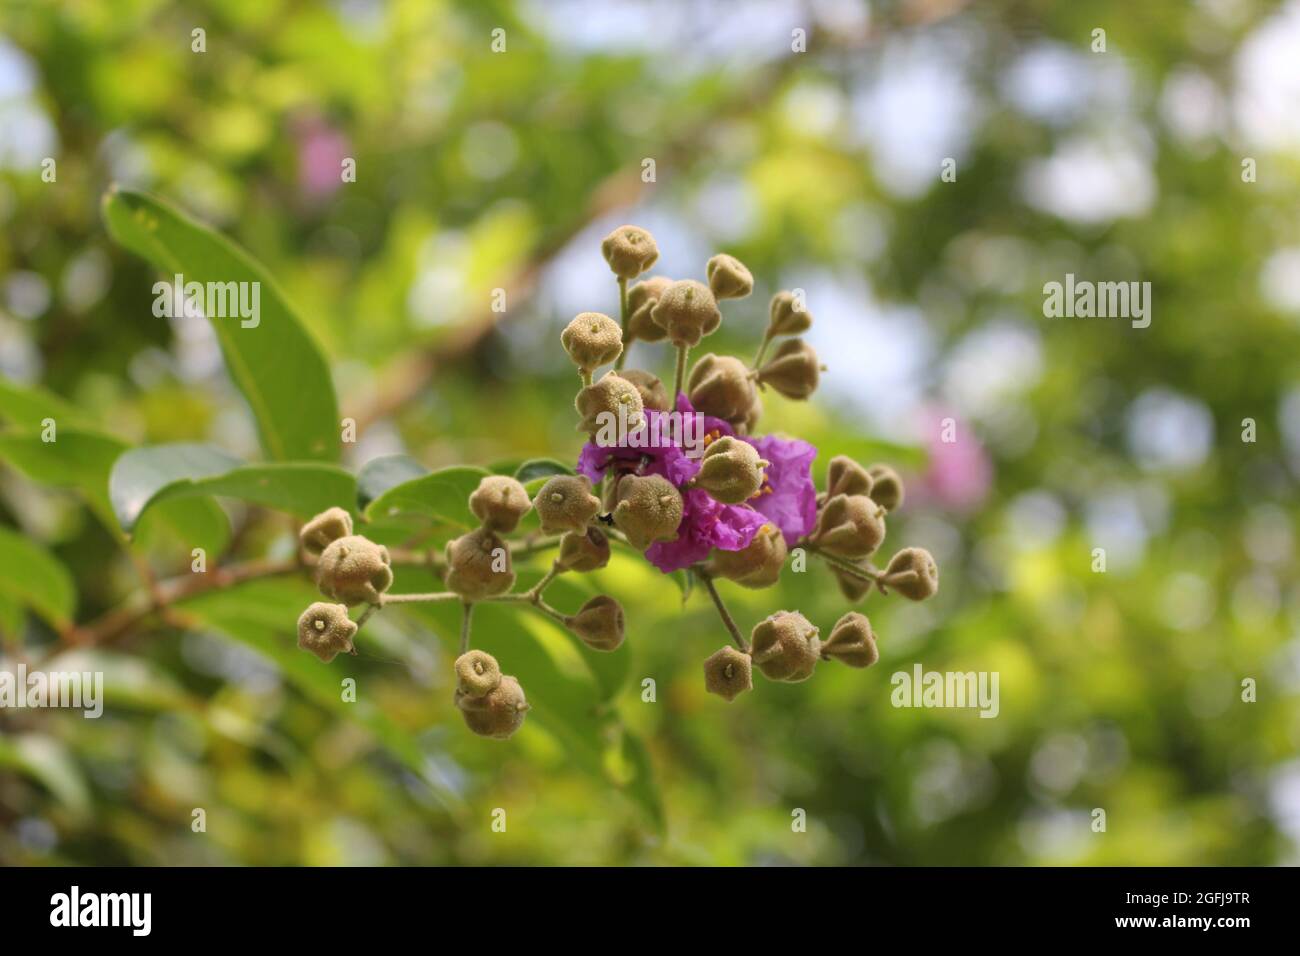 Fruits of the Inthanin tree, Queen's Flower, Lagerstroemia speciosa and flower Stock Photo